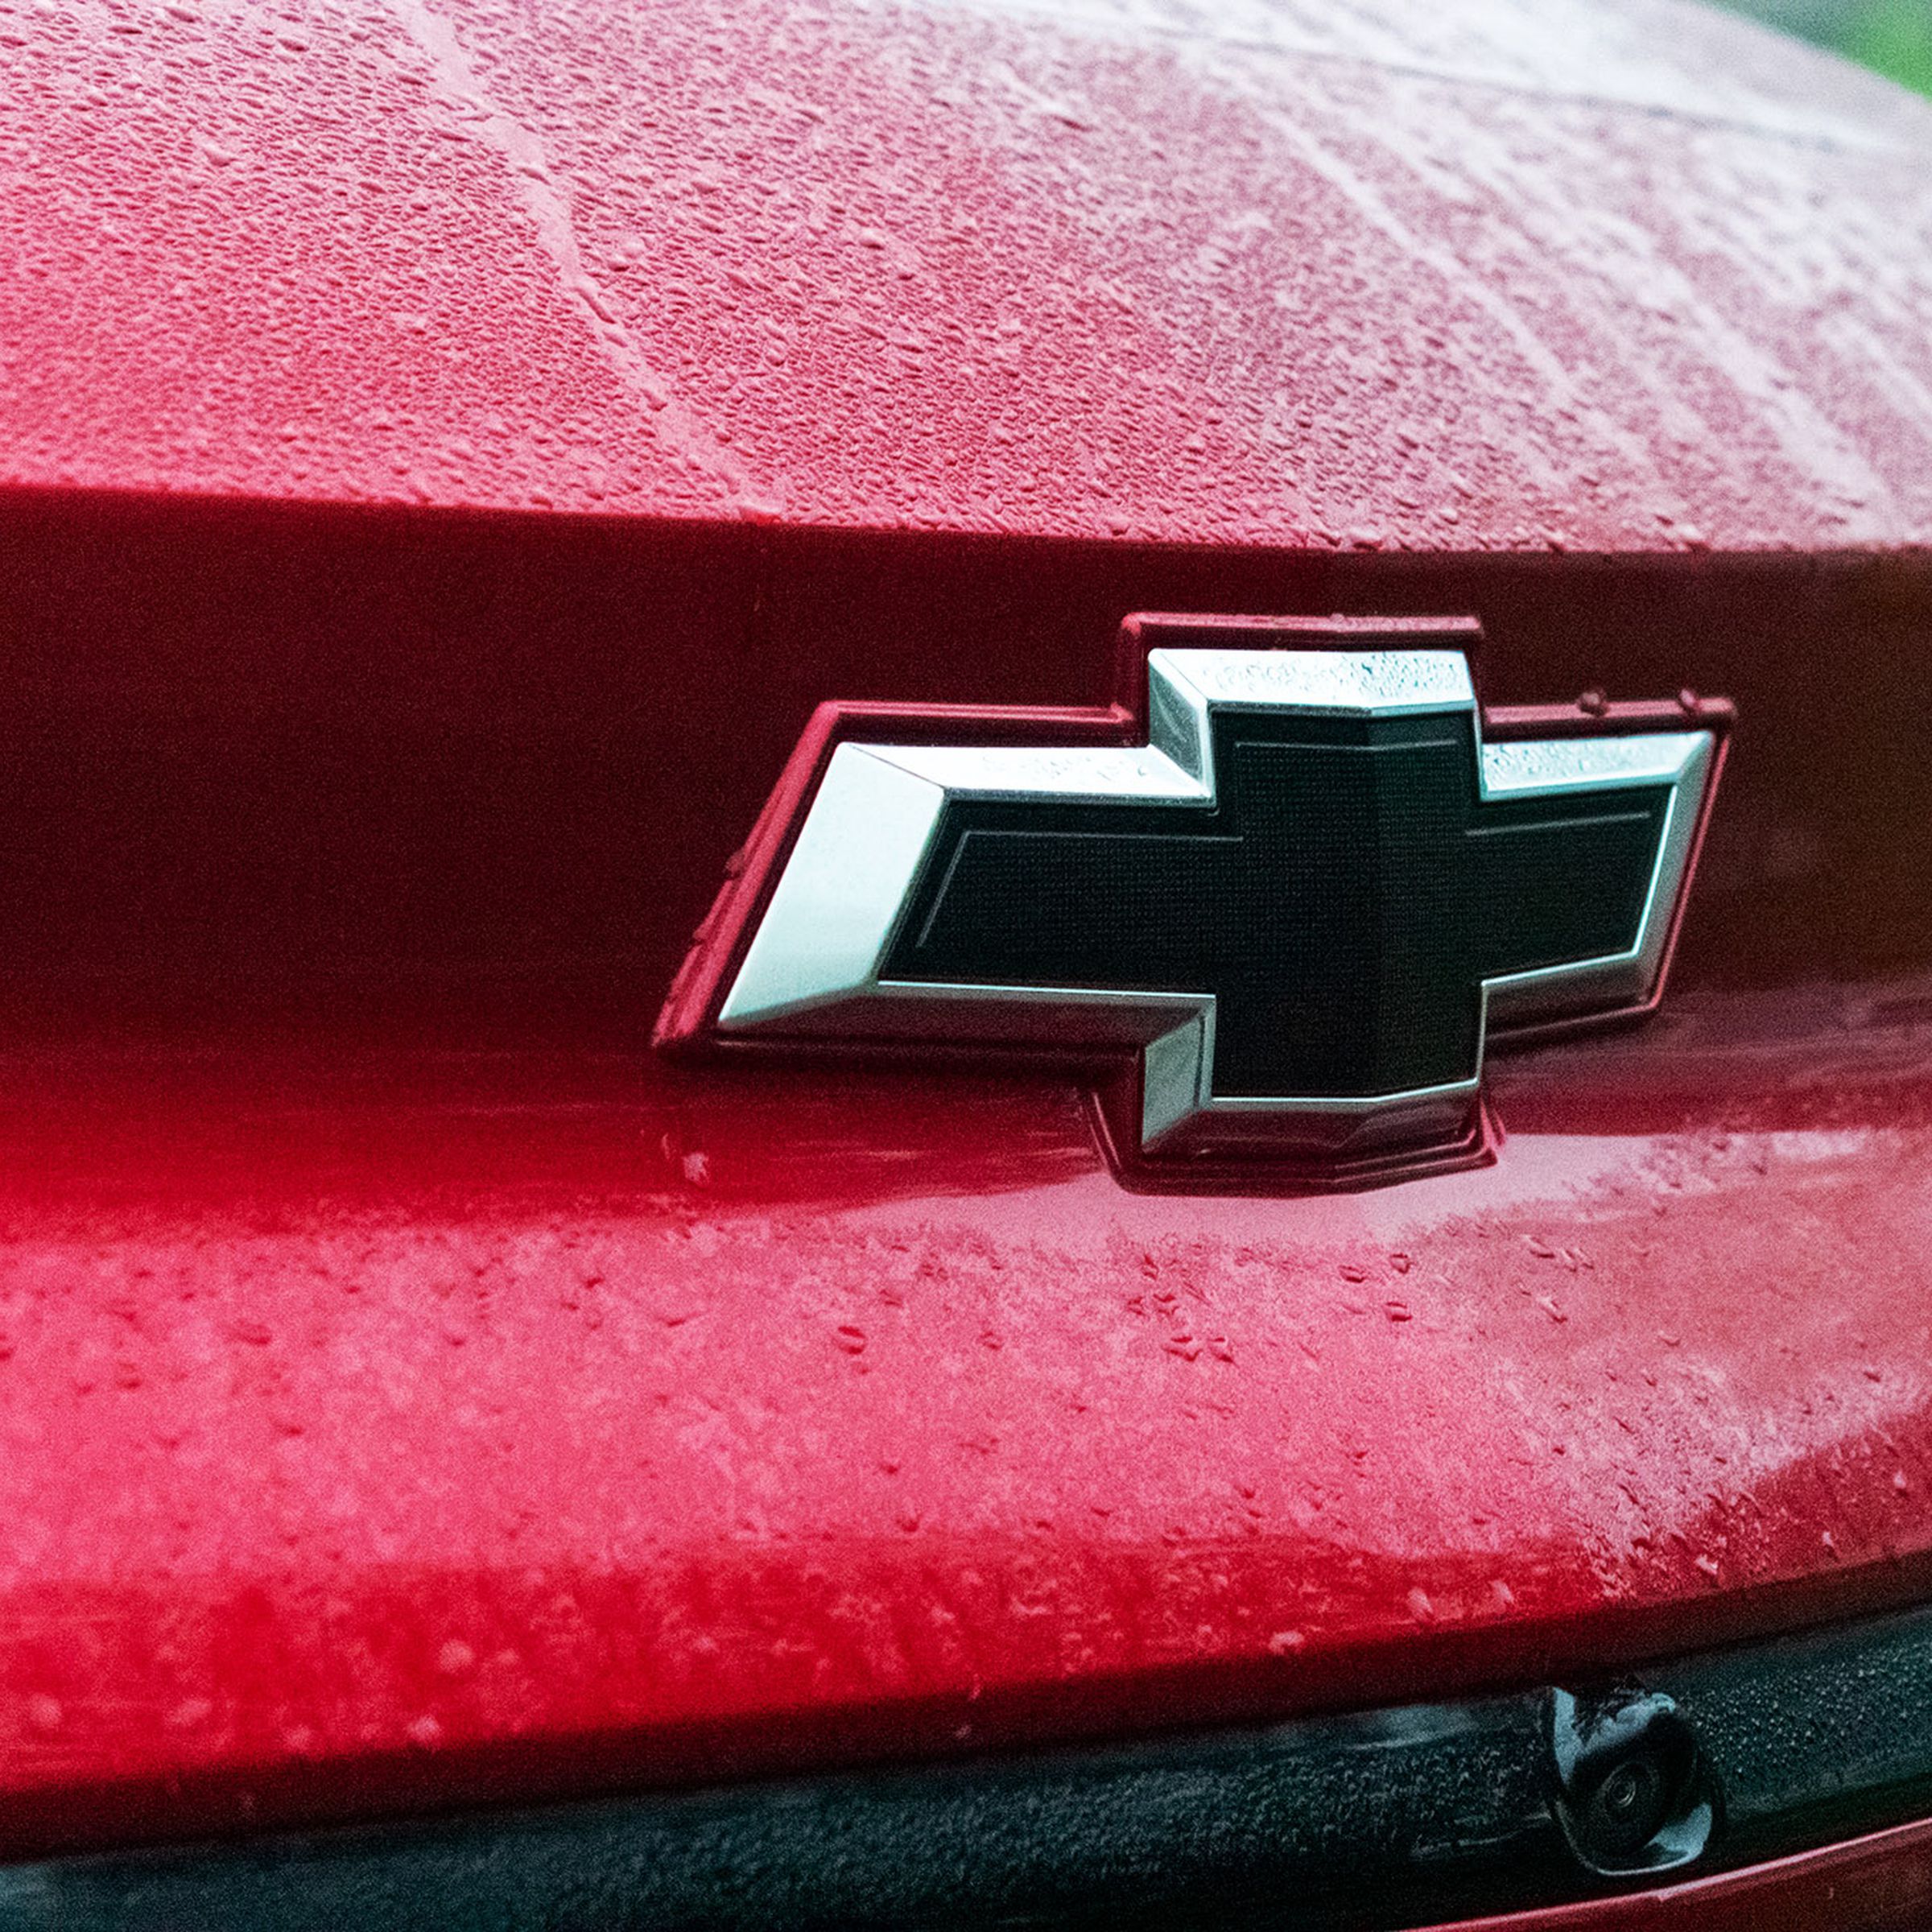 The Chevy logo on the front of a red vehicle